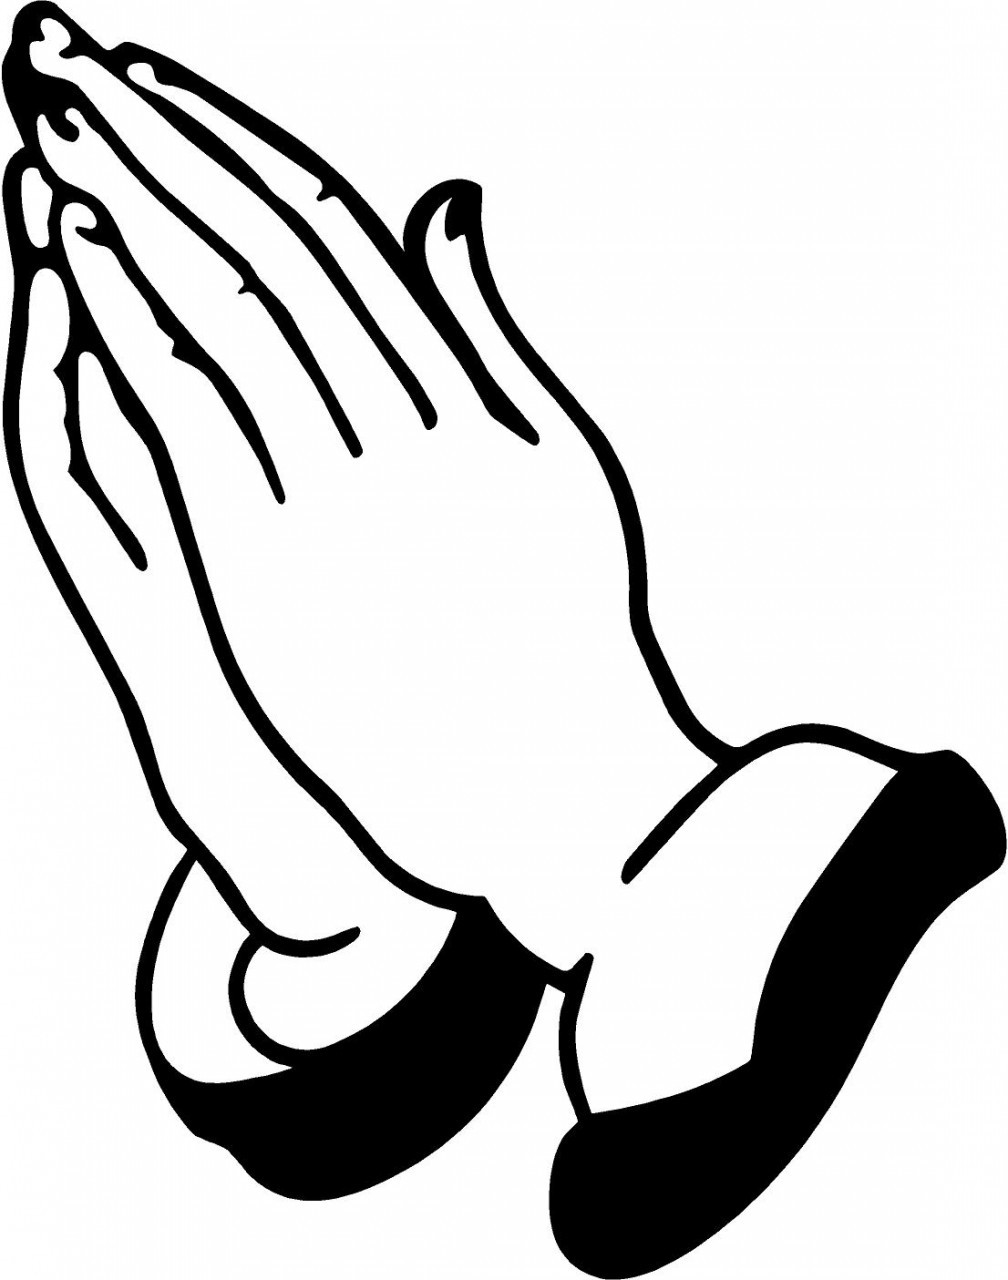 Coloring pages of praying hands - Coloring Pages & Pictures - IMAGIXS